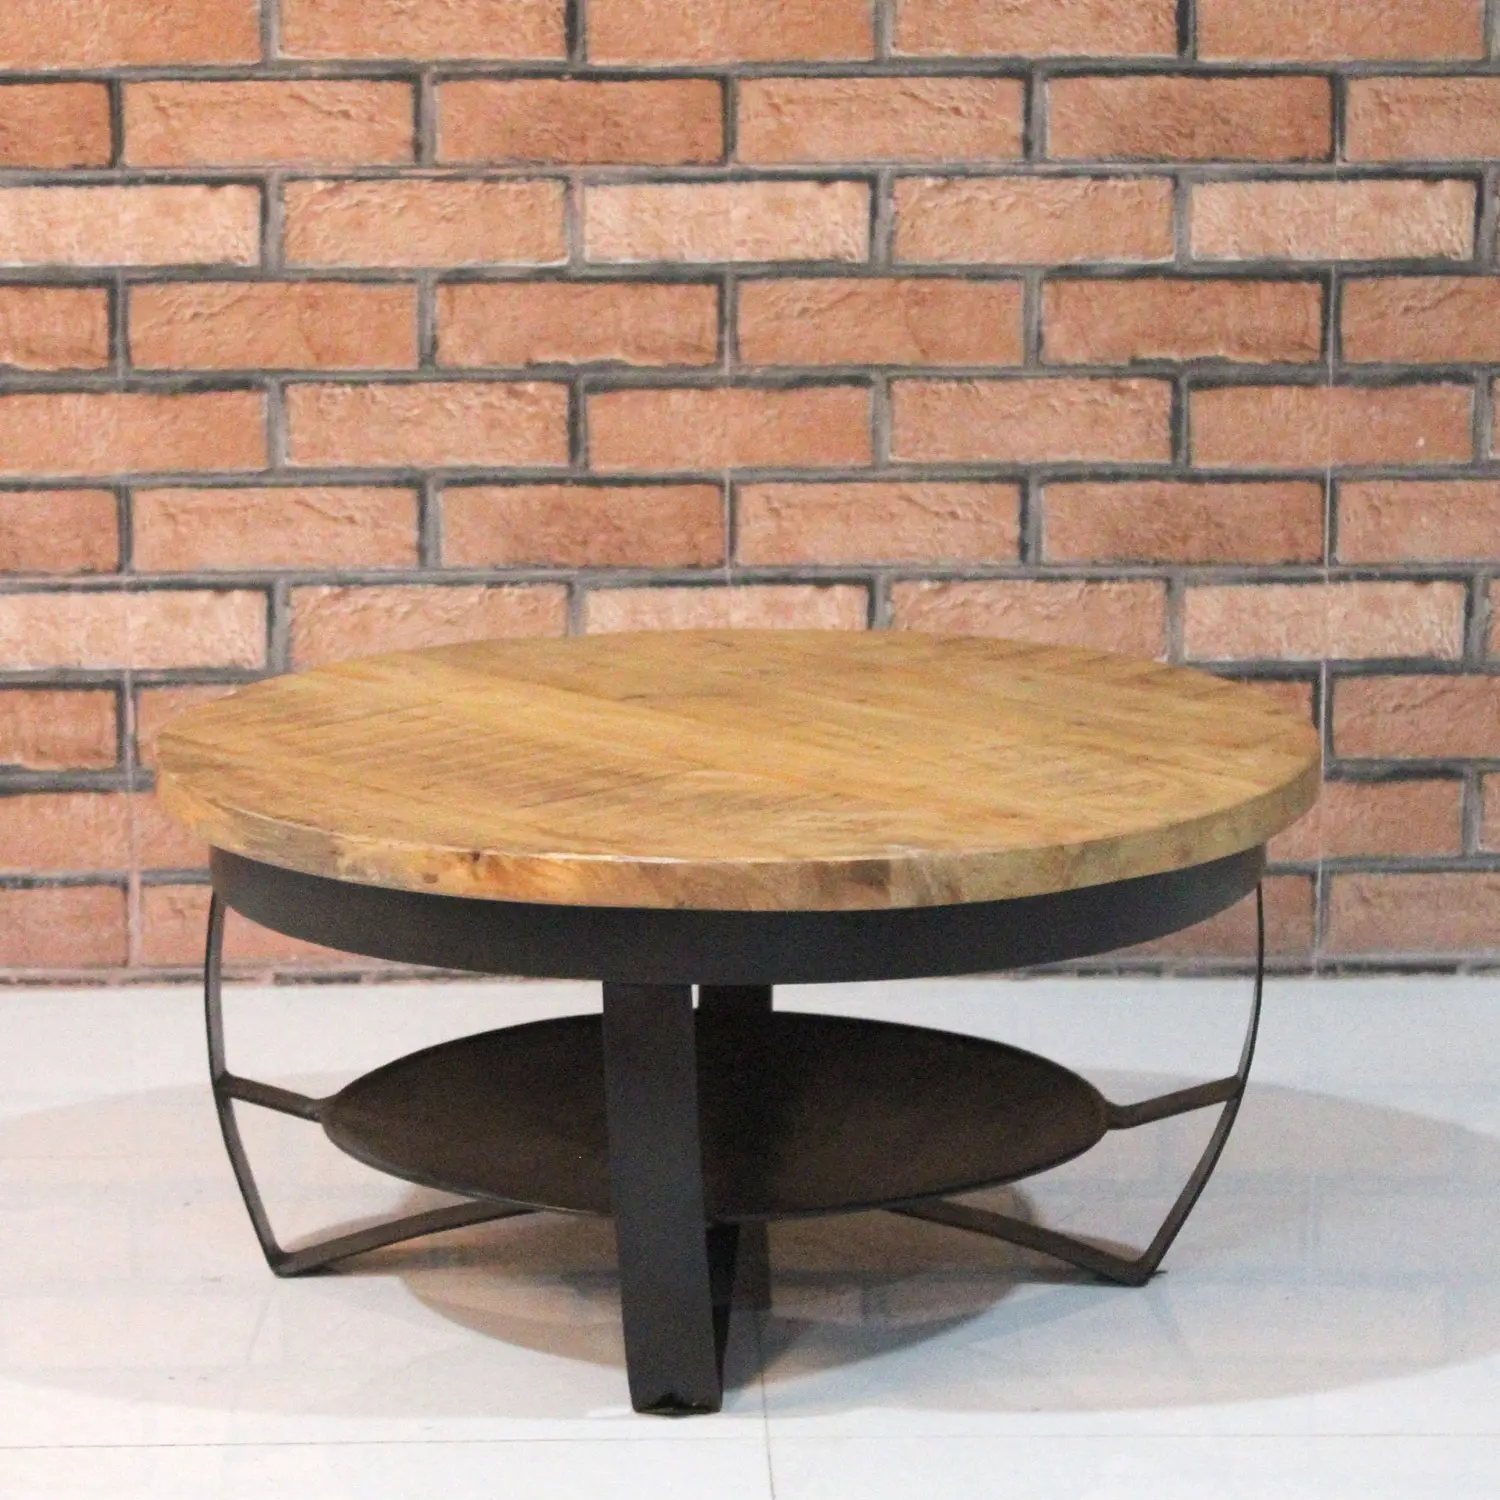 Iron Round Coffee Table with Wooden Top Black - popular handicrafts